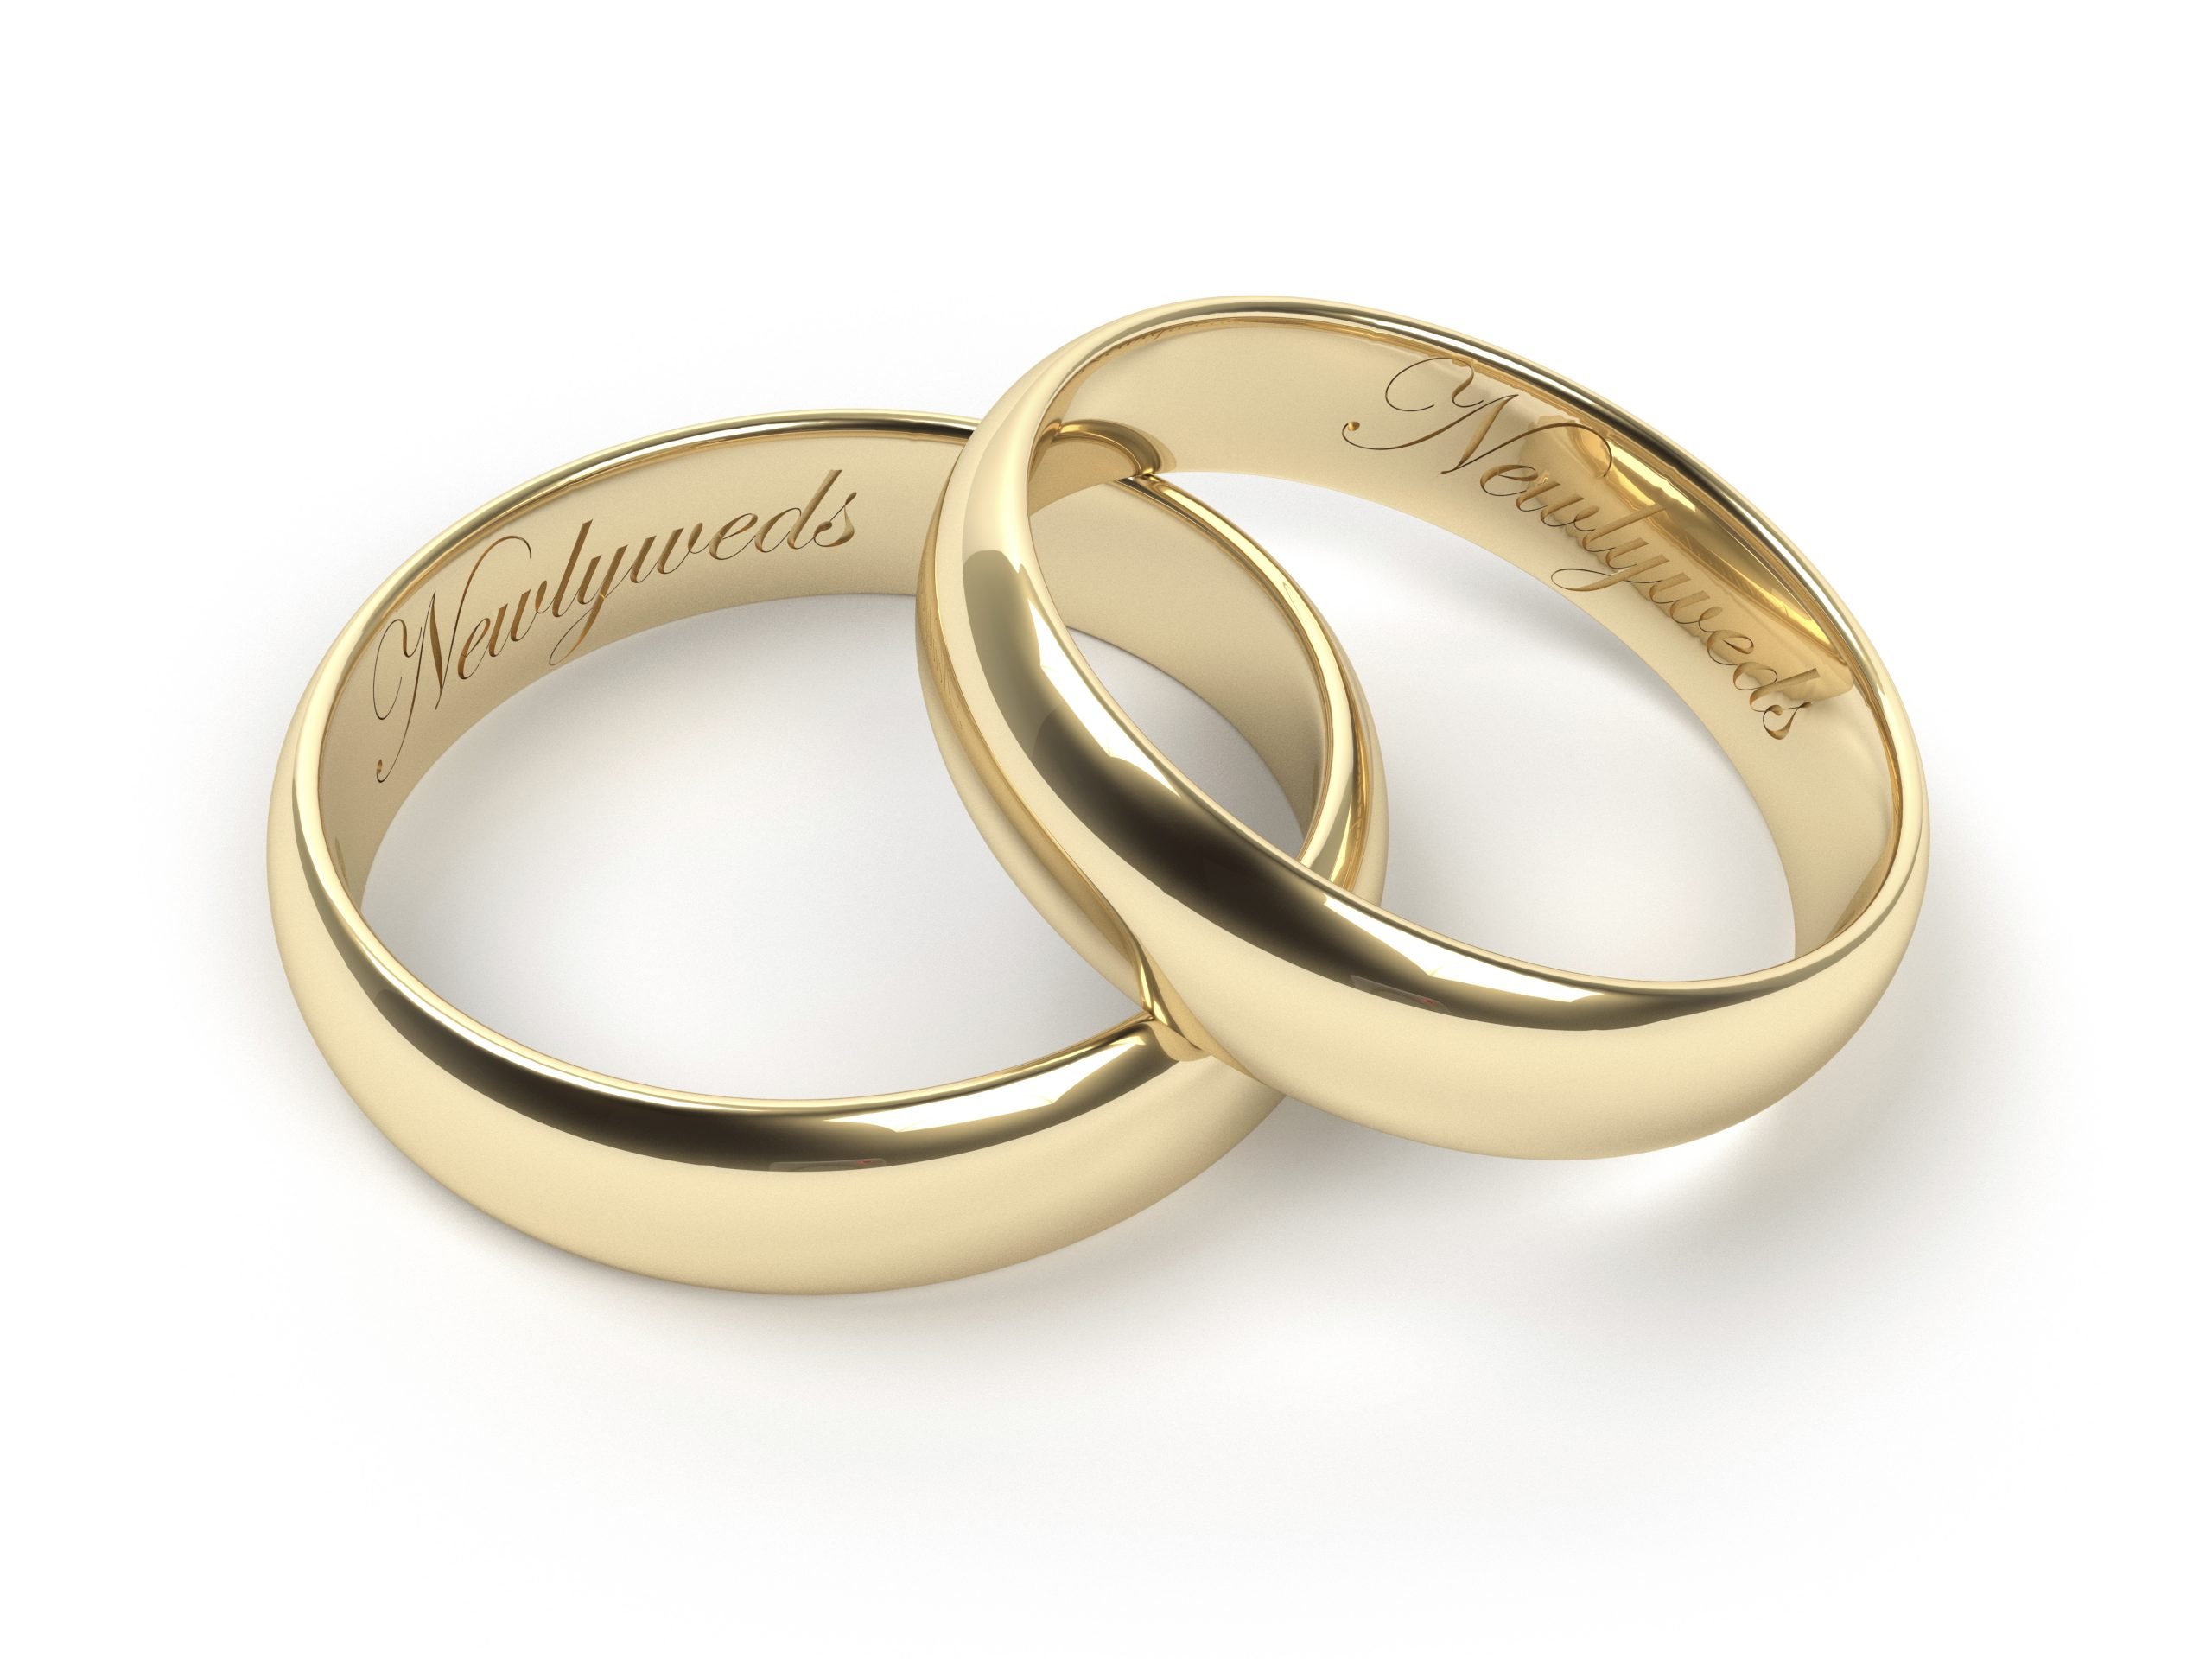 Wedding Ring Engravings: Everything You Need to Know